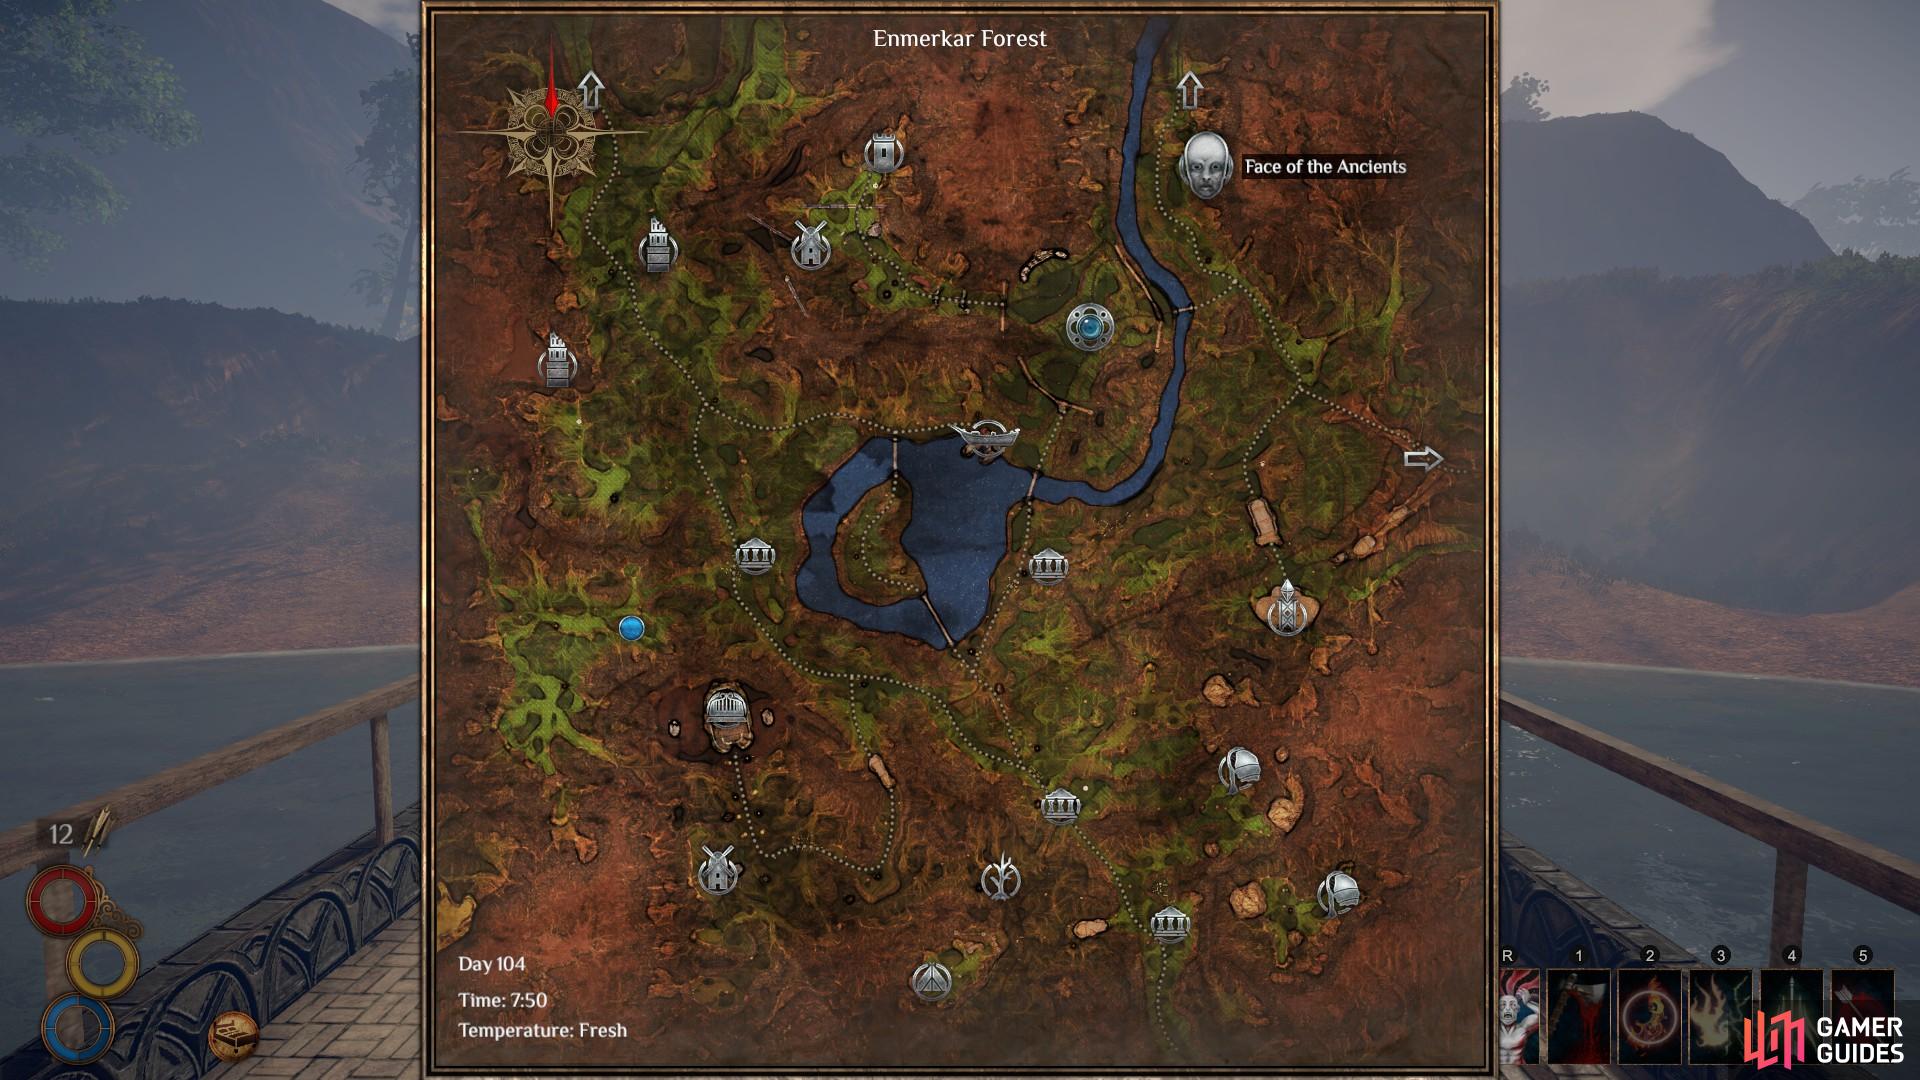 The location of the Face of the Ancients dungeon, north east of the city of Berg.